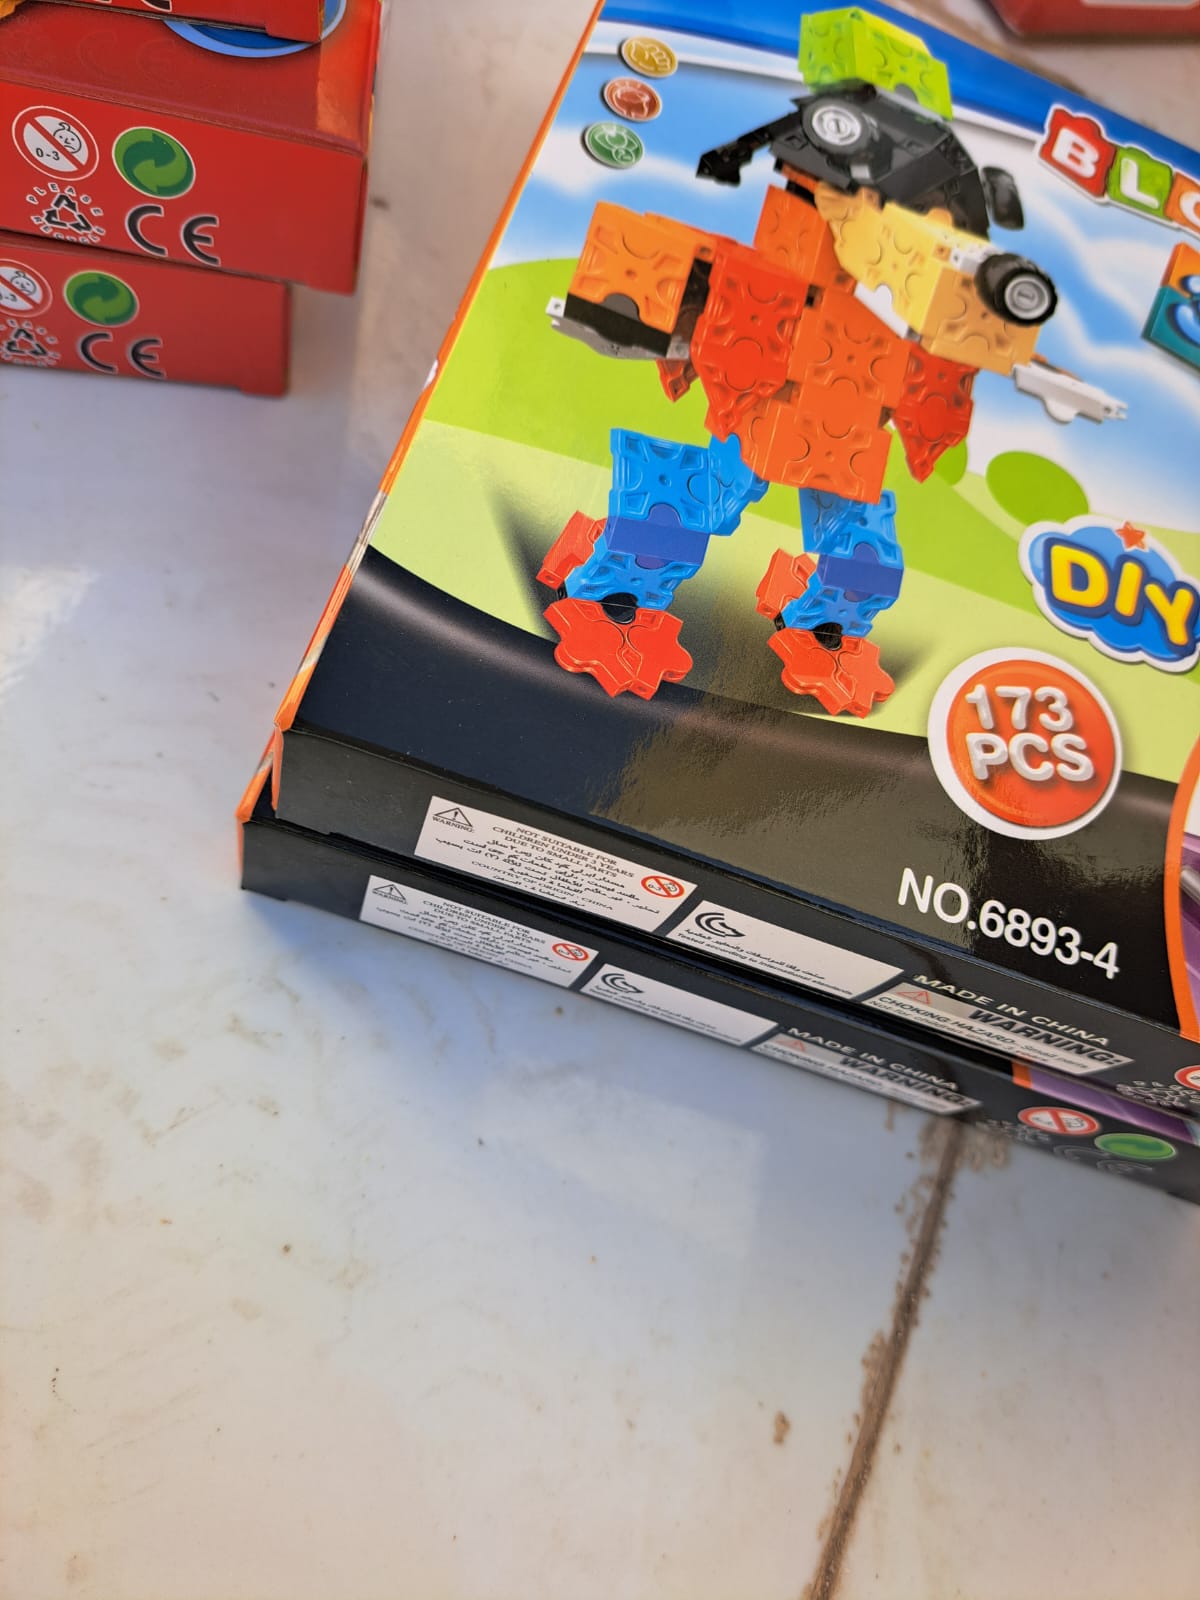 Mickey Mouse 3D Puzzle Blocks